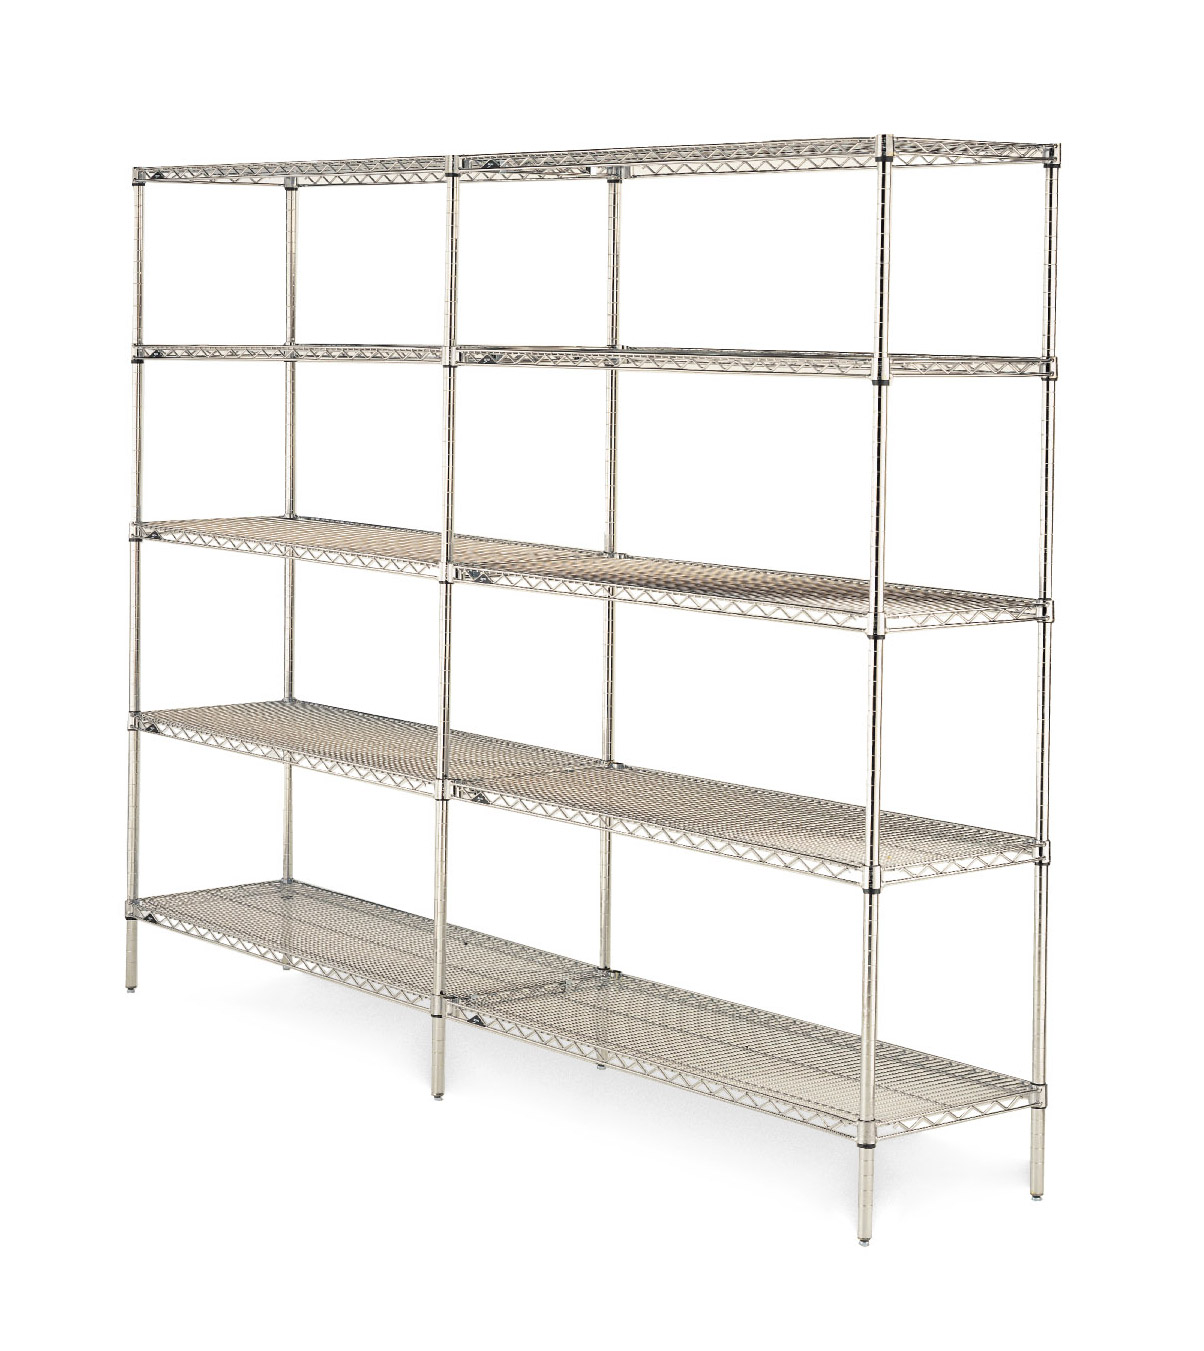 Metro Shelving Assembly Instructions, Wire Shelving Parts